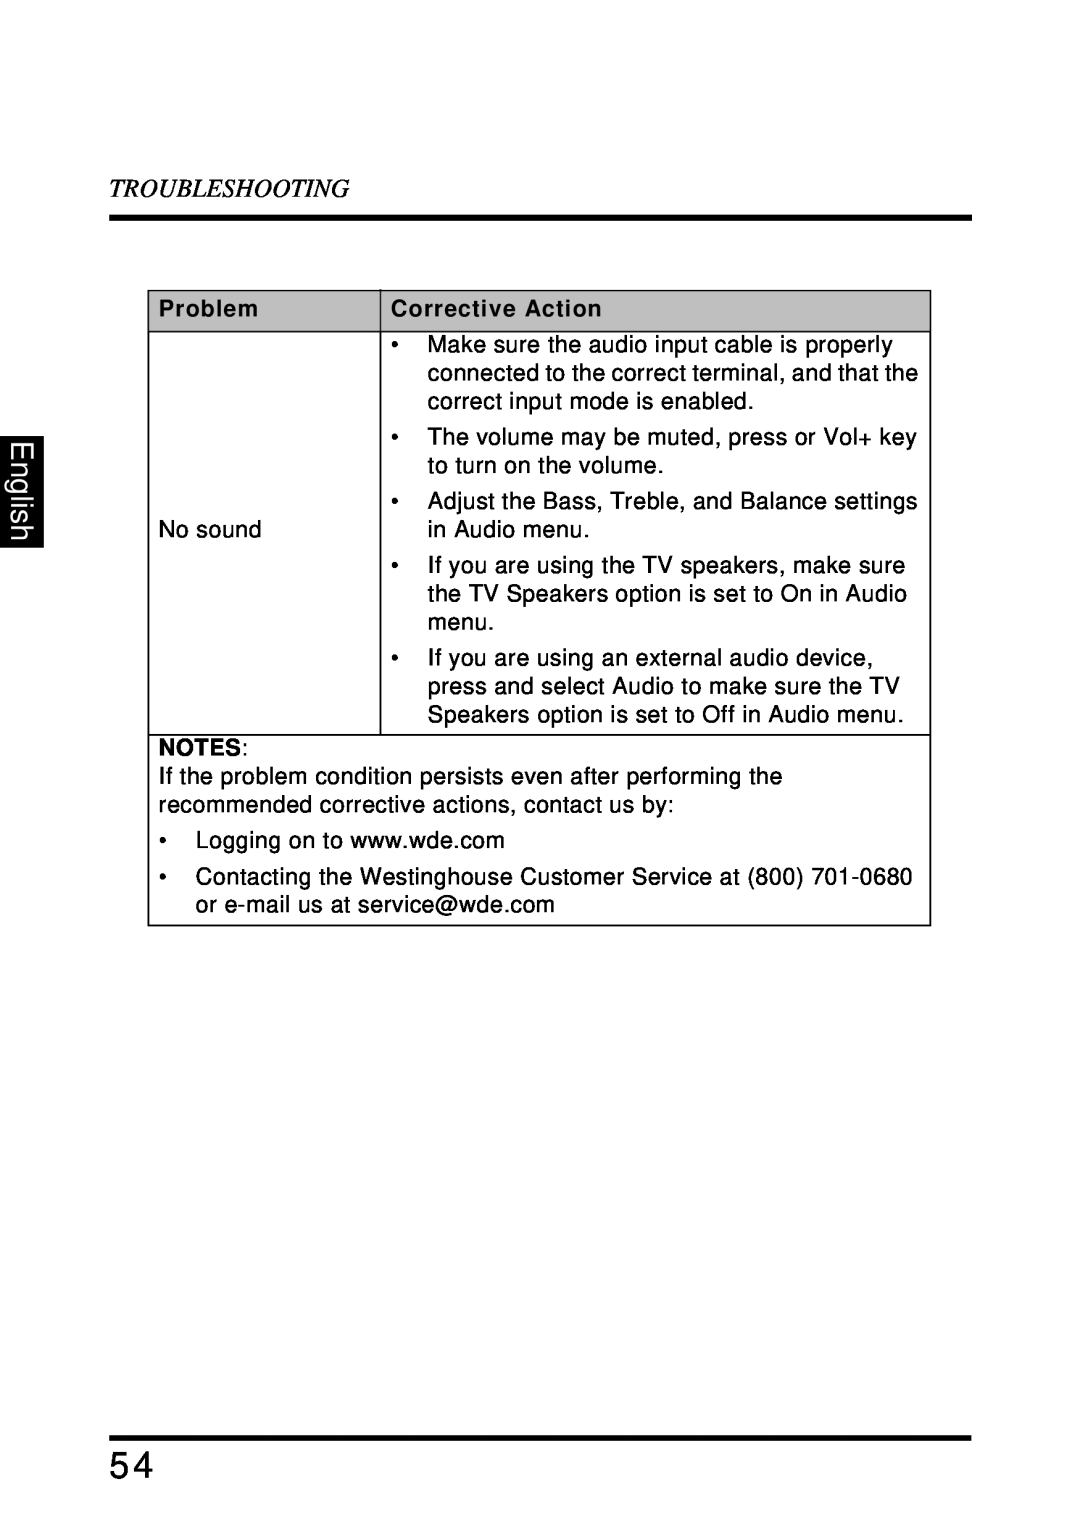 Westinghouse SK-32H640G user manual English, Troubleshooting, Problem, Corrective Action 